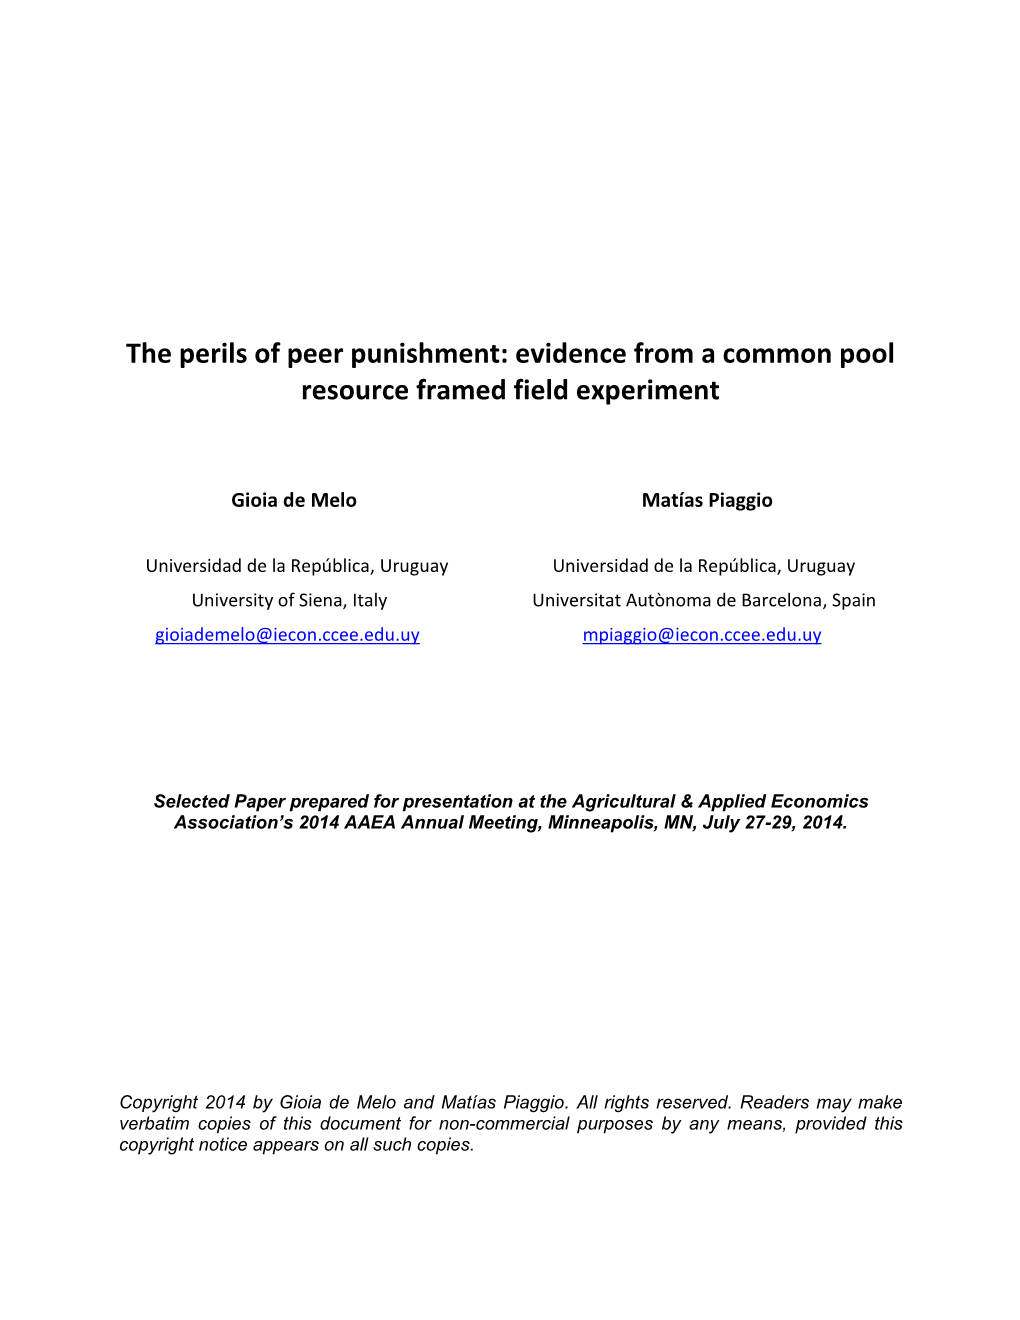 The Perils of Peer Punishment: Evidence from a Common Pool Resource Framed Field Experiment